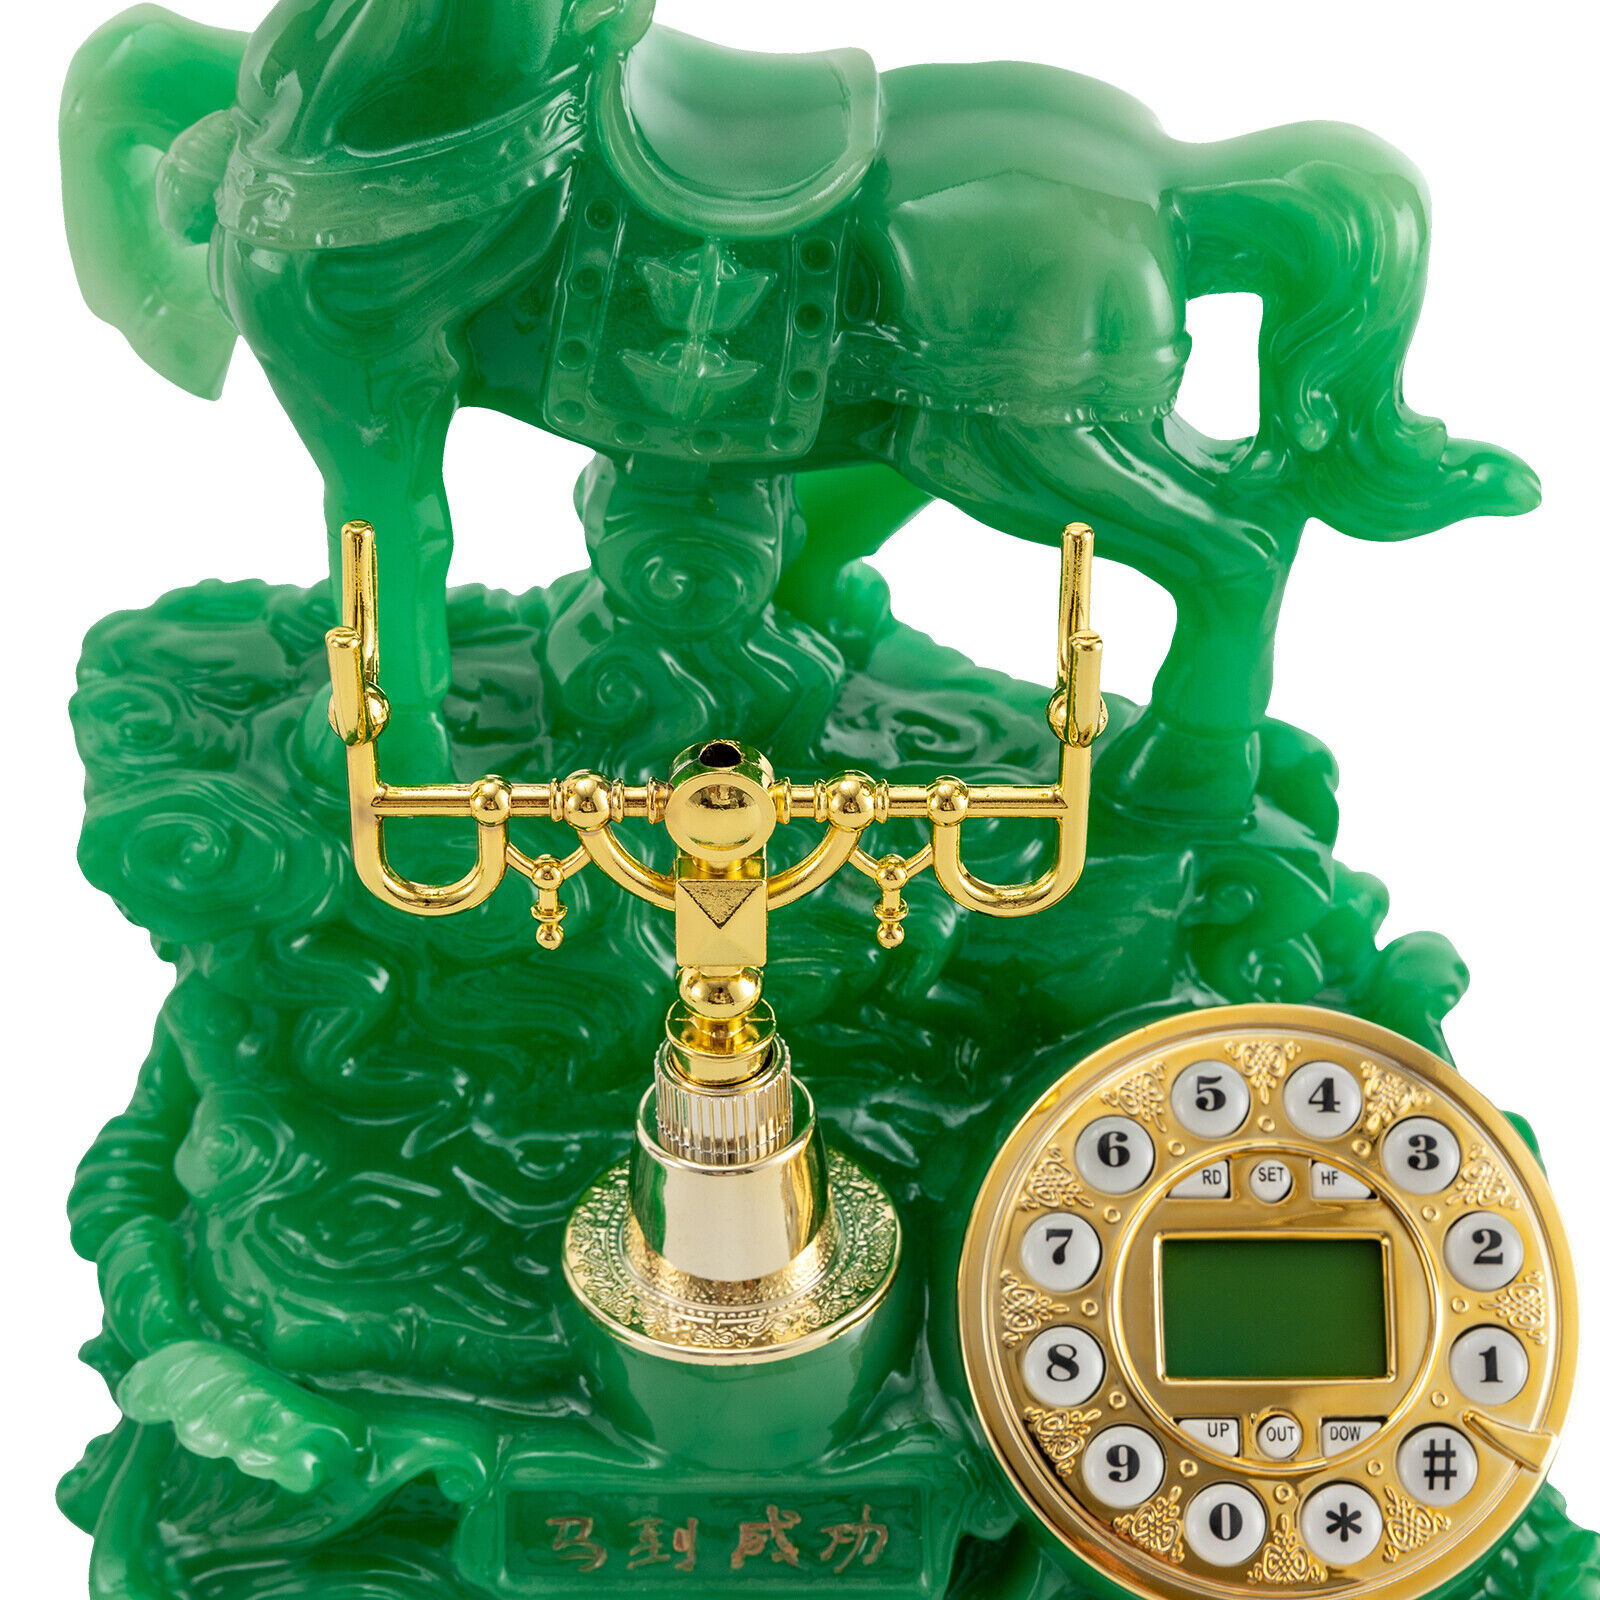 Retro Horse Design Telephone Dial Corded Phone Exquisite Workmanship Green Unbranded Does not apply - фотография #6